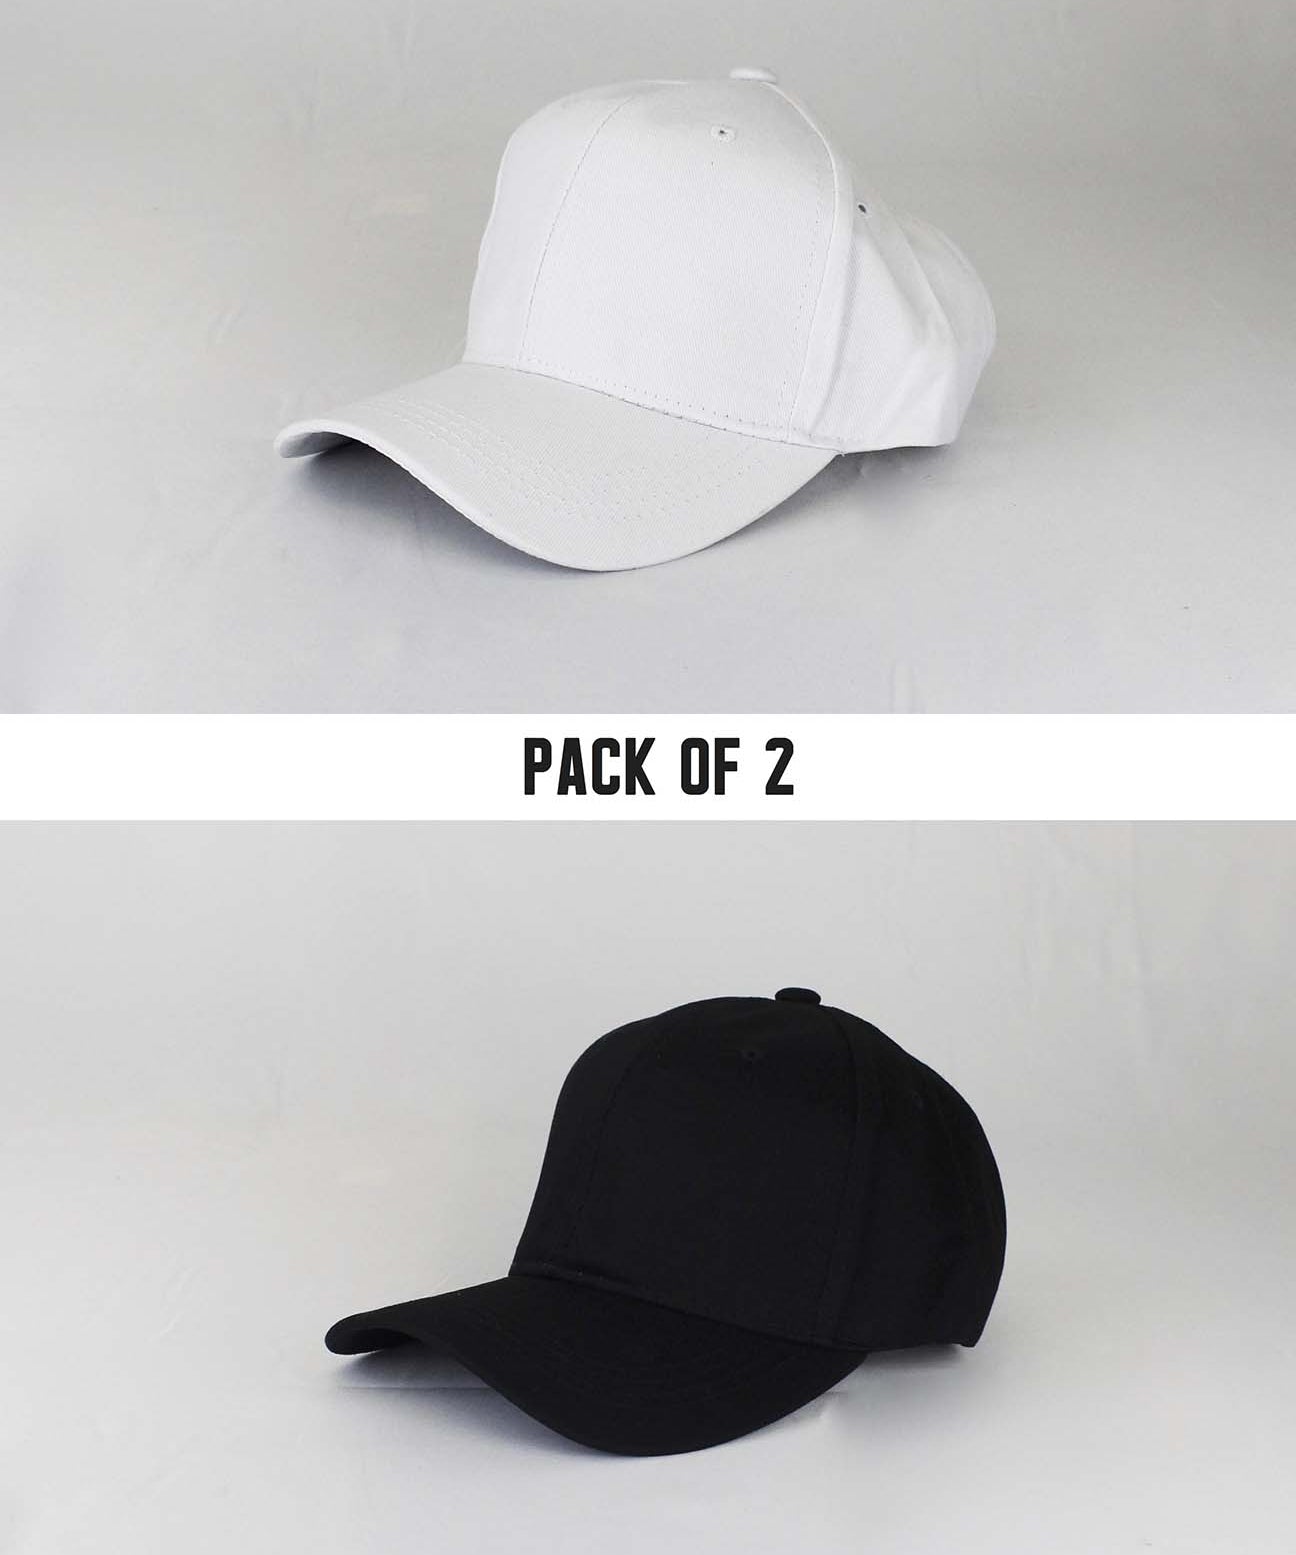 PACK OF 2 CAPS - svnx